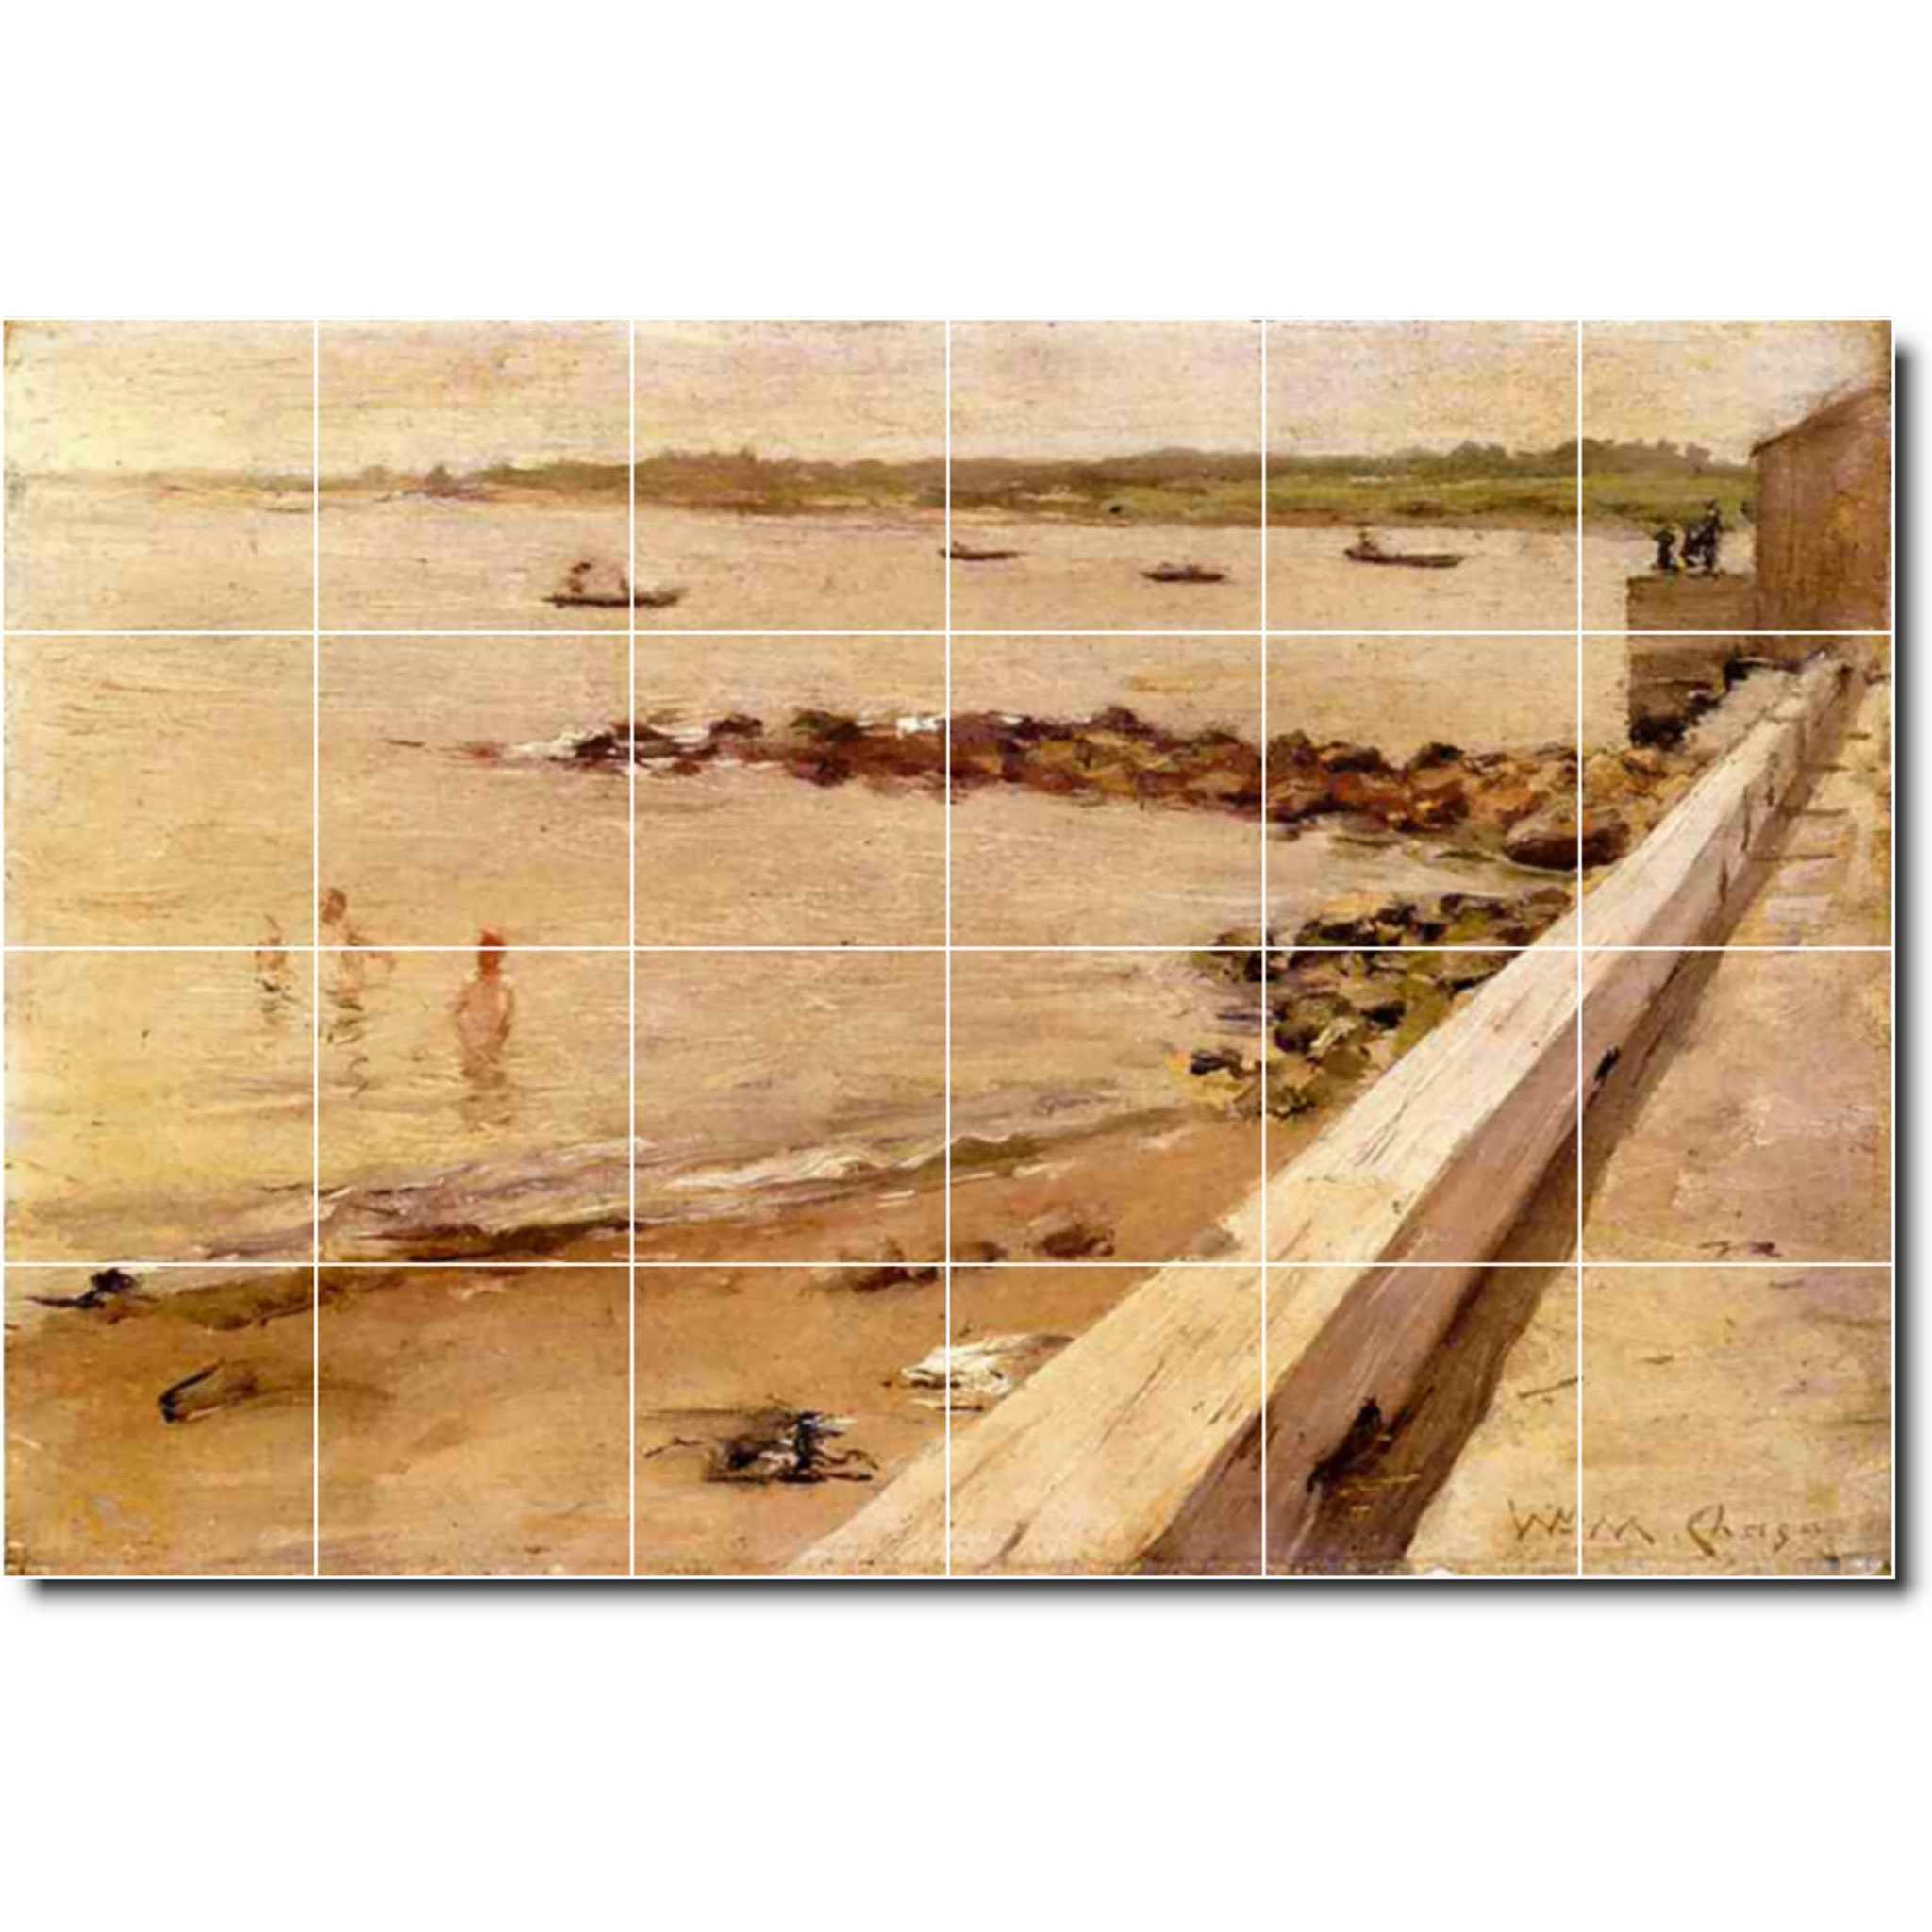 william chase waterfront painting ceramic tile mural p01656